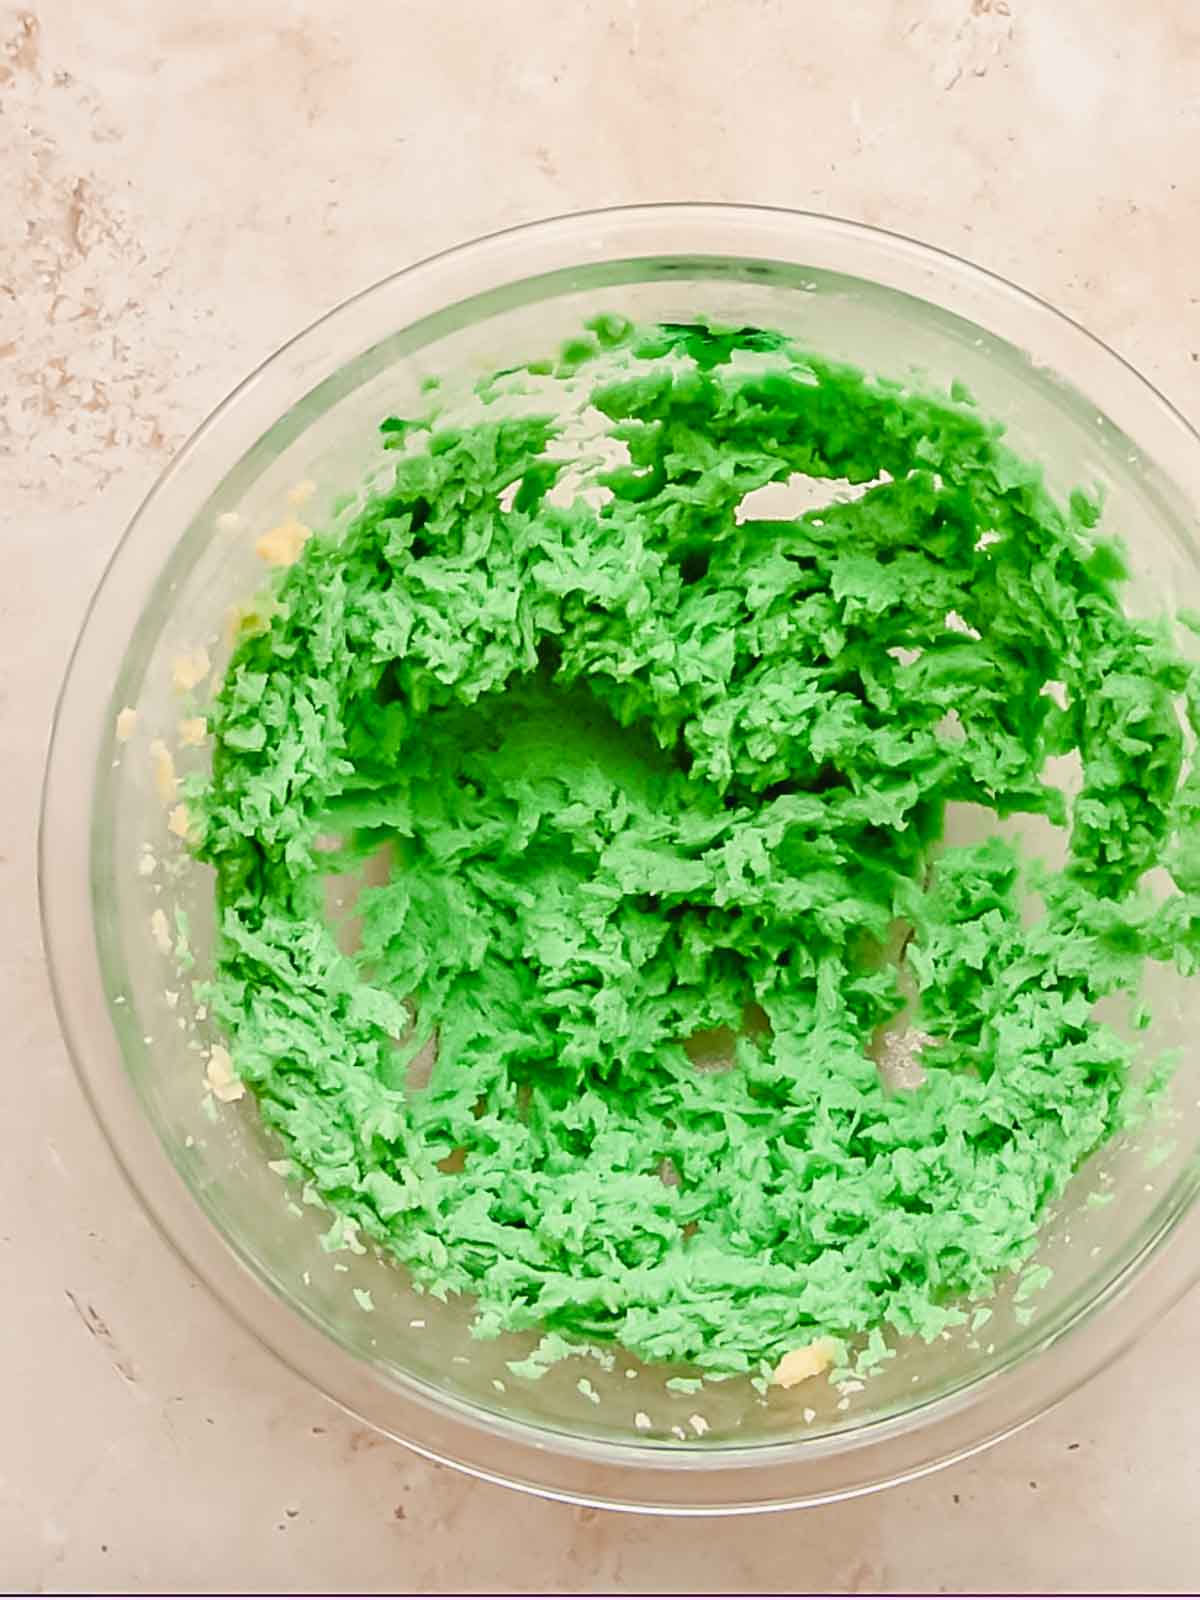 Green cookie dough in a bowl before flour is added.